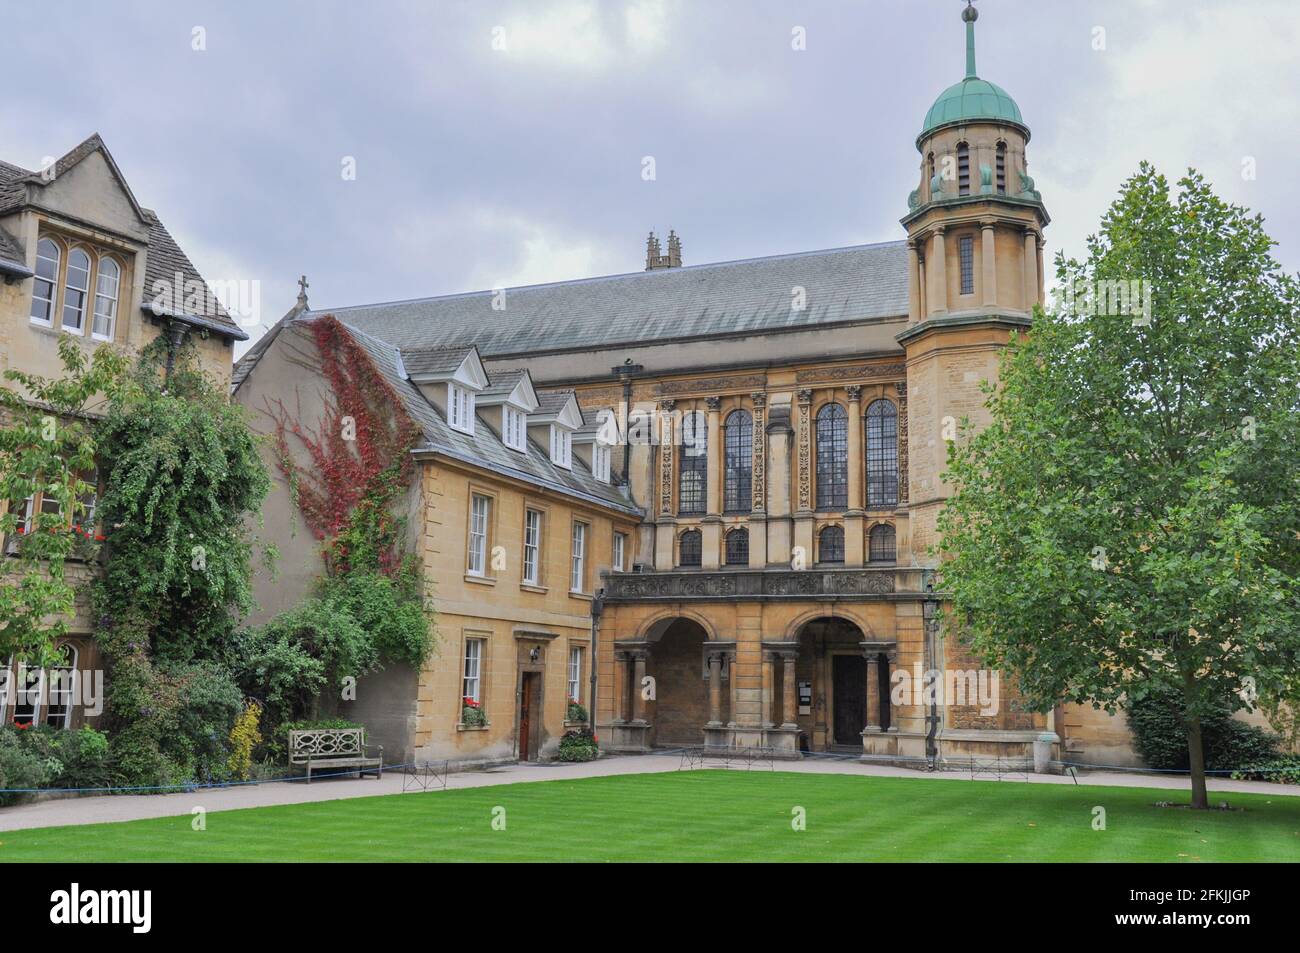 View of T. G. Jackson chapel from Hertford College Old Quad, Oxford, United Kingdom. Overcast Sky. Stock Photo